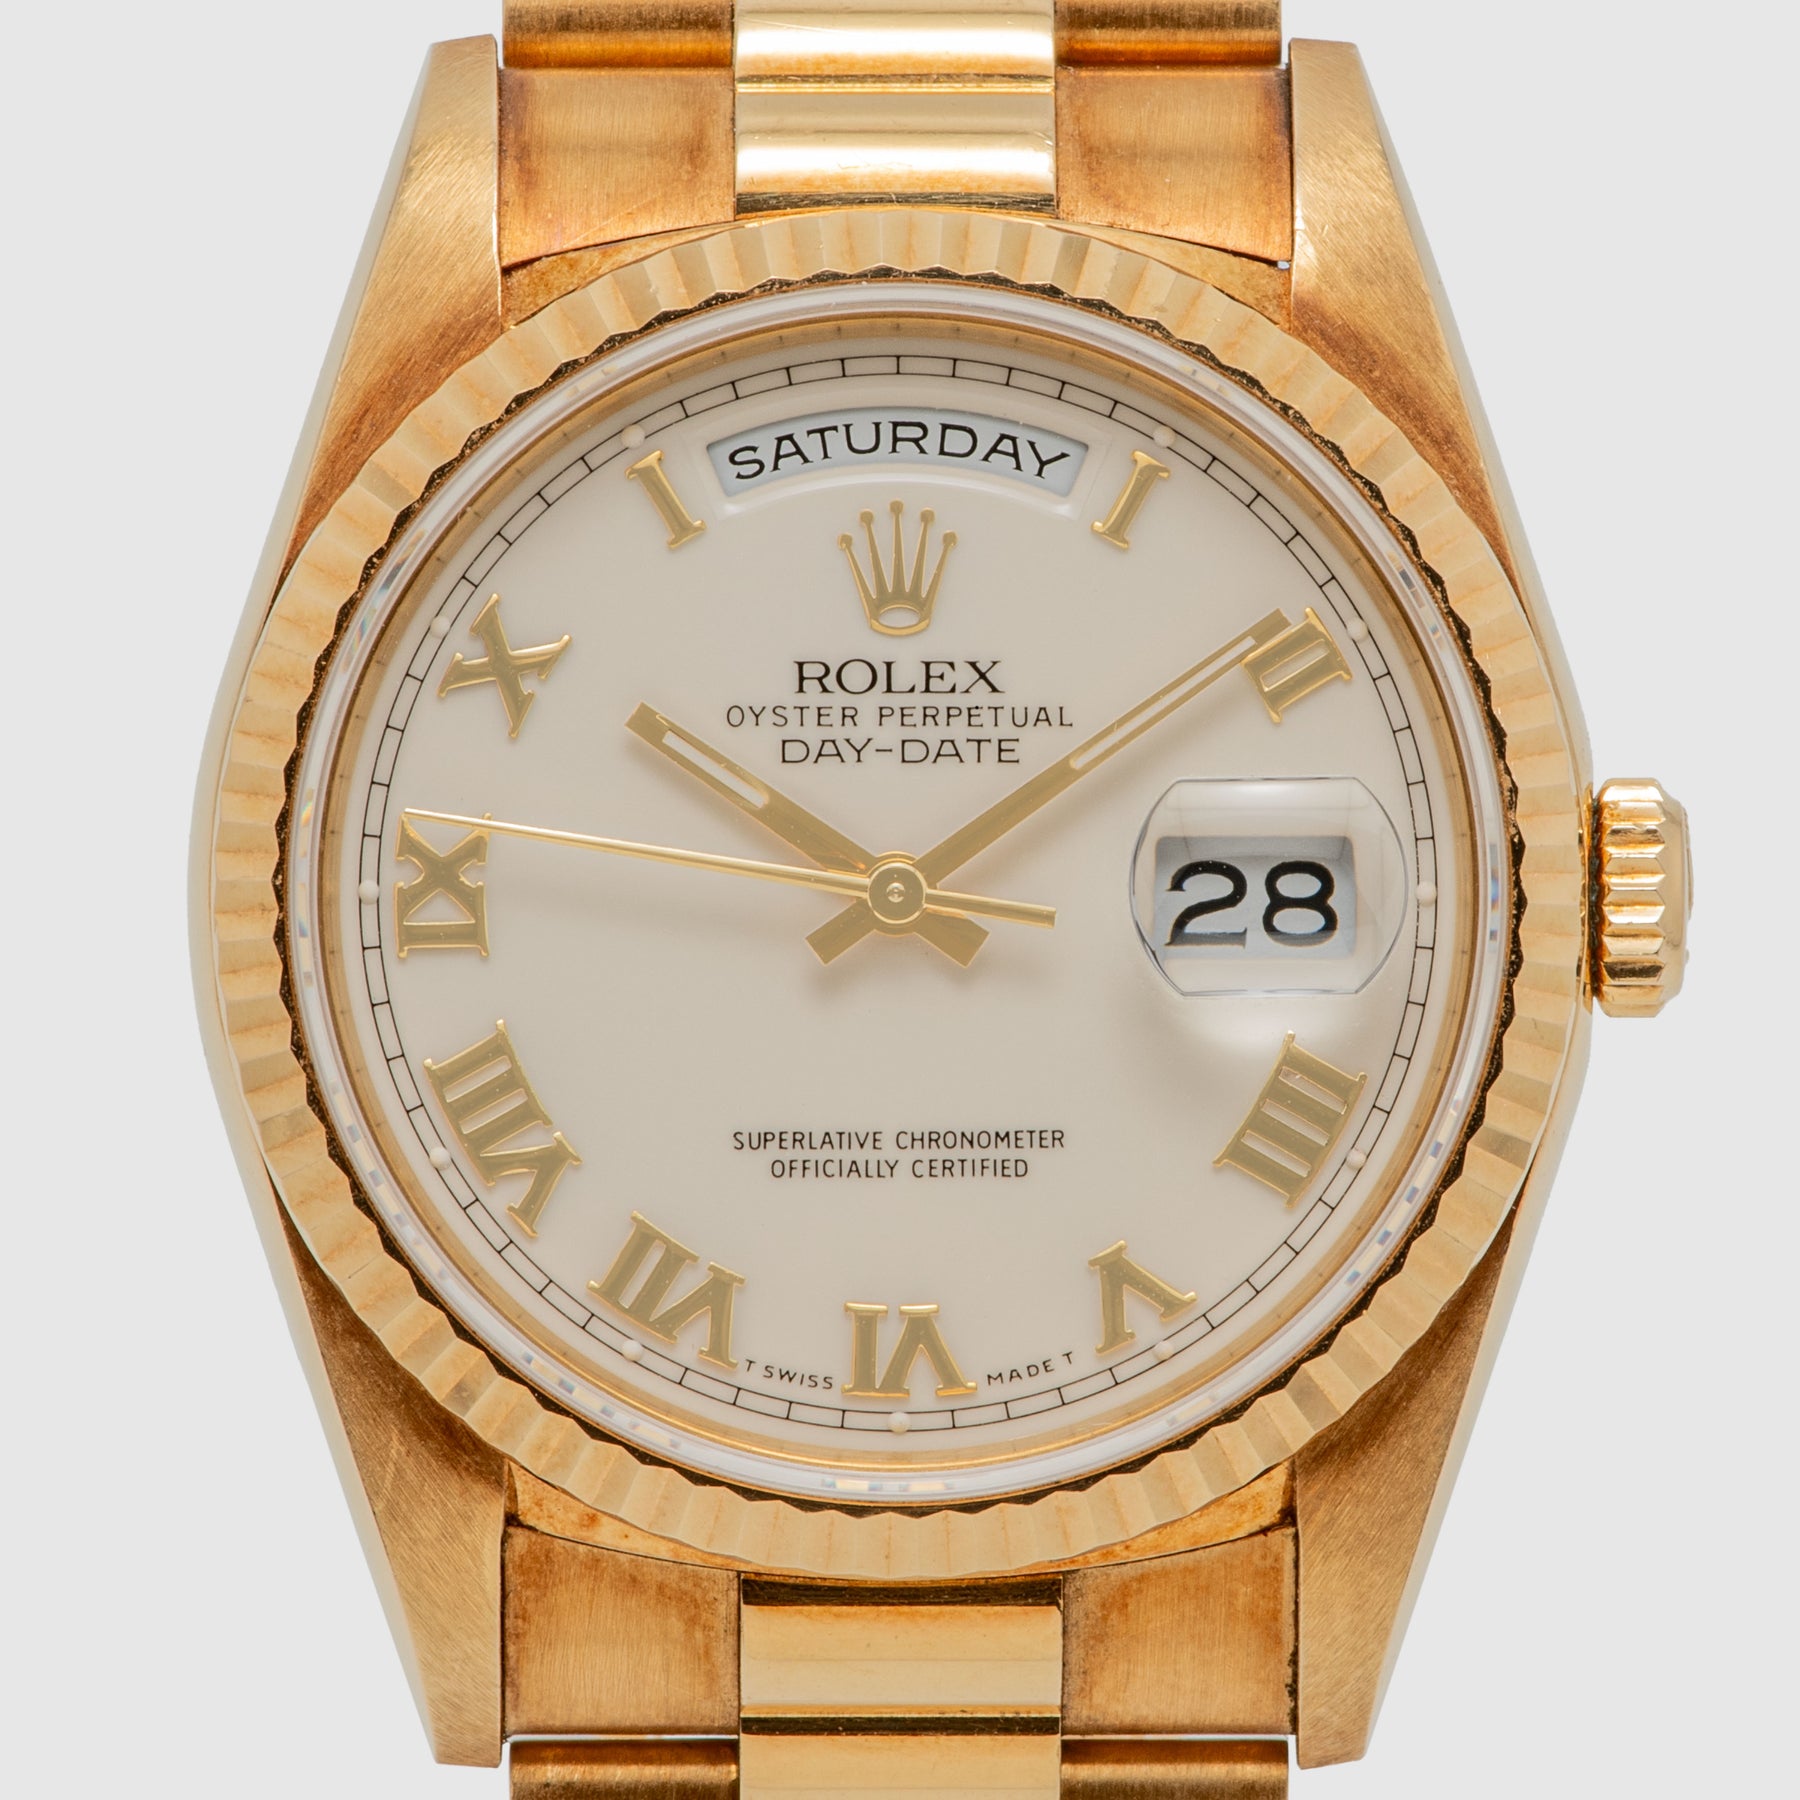 1989 Rolex Day Date White Roman Dial Ref. 18238 (with Papers)